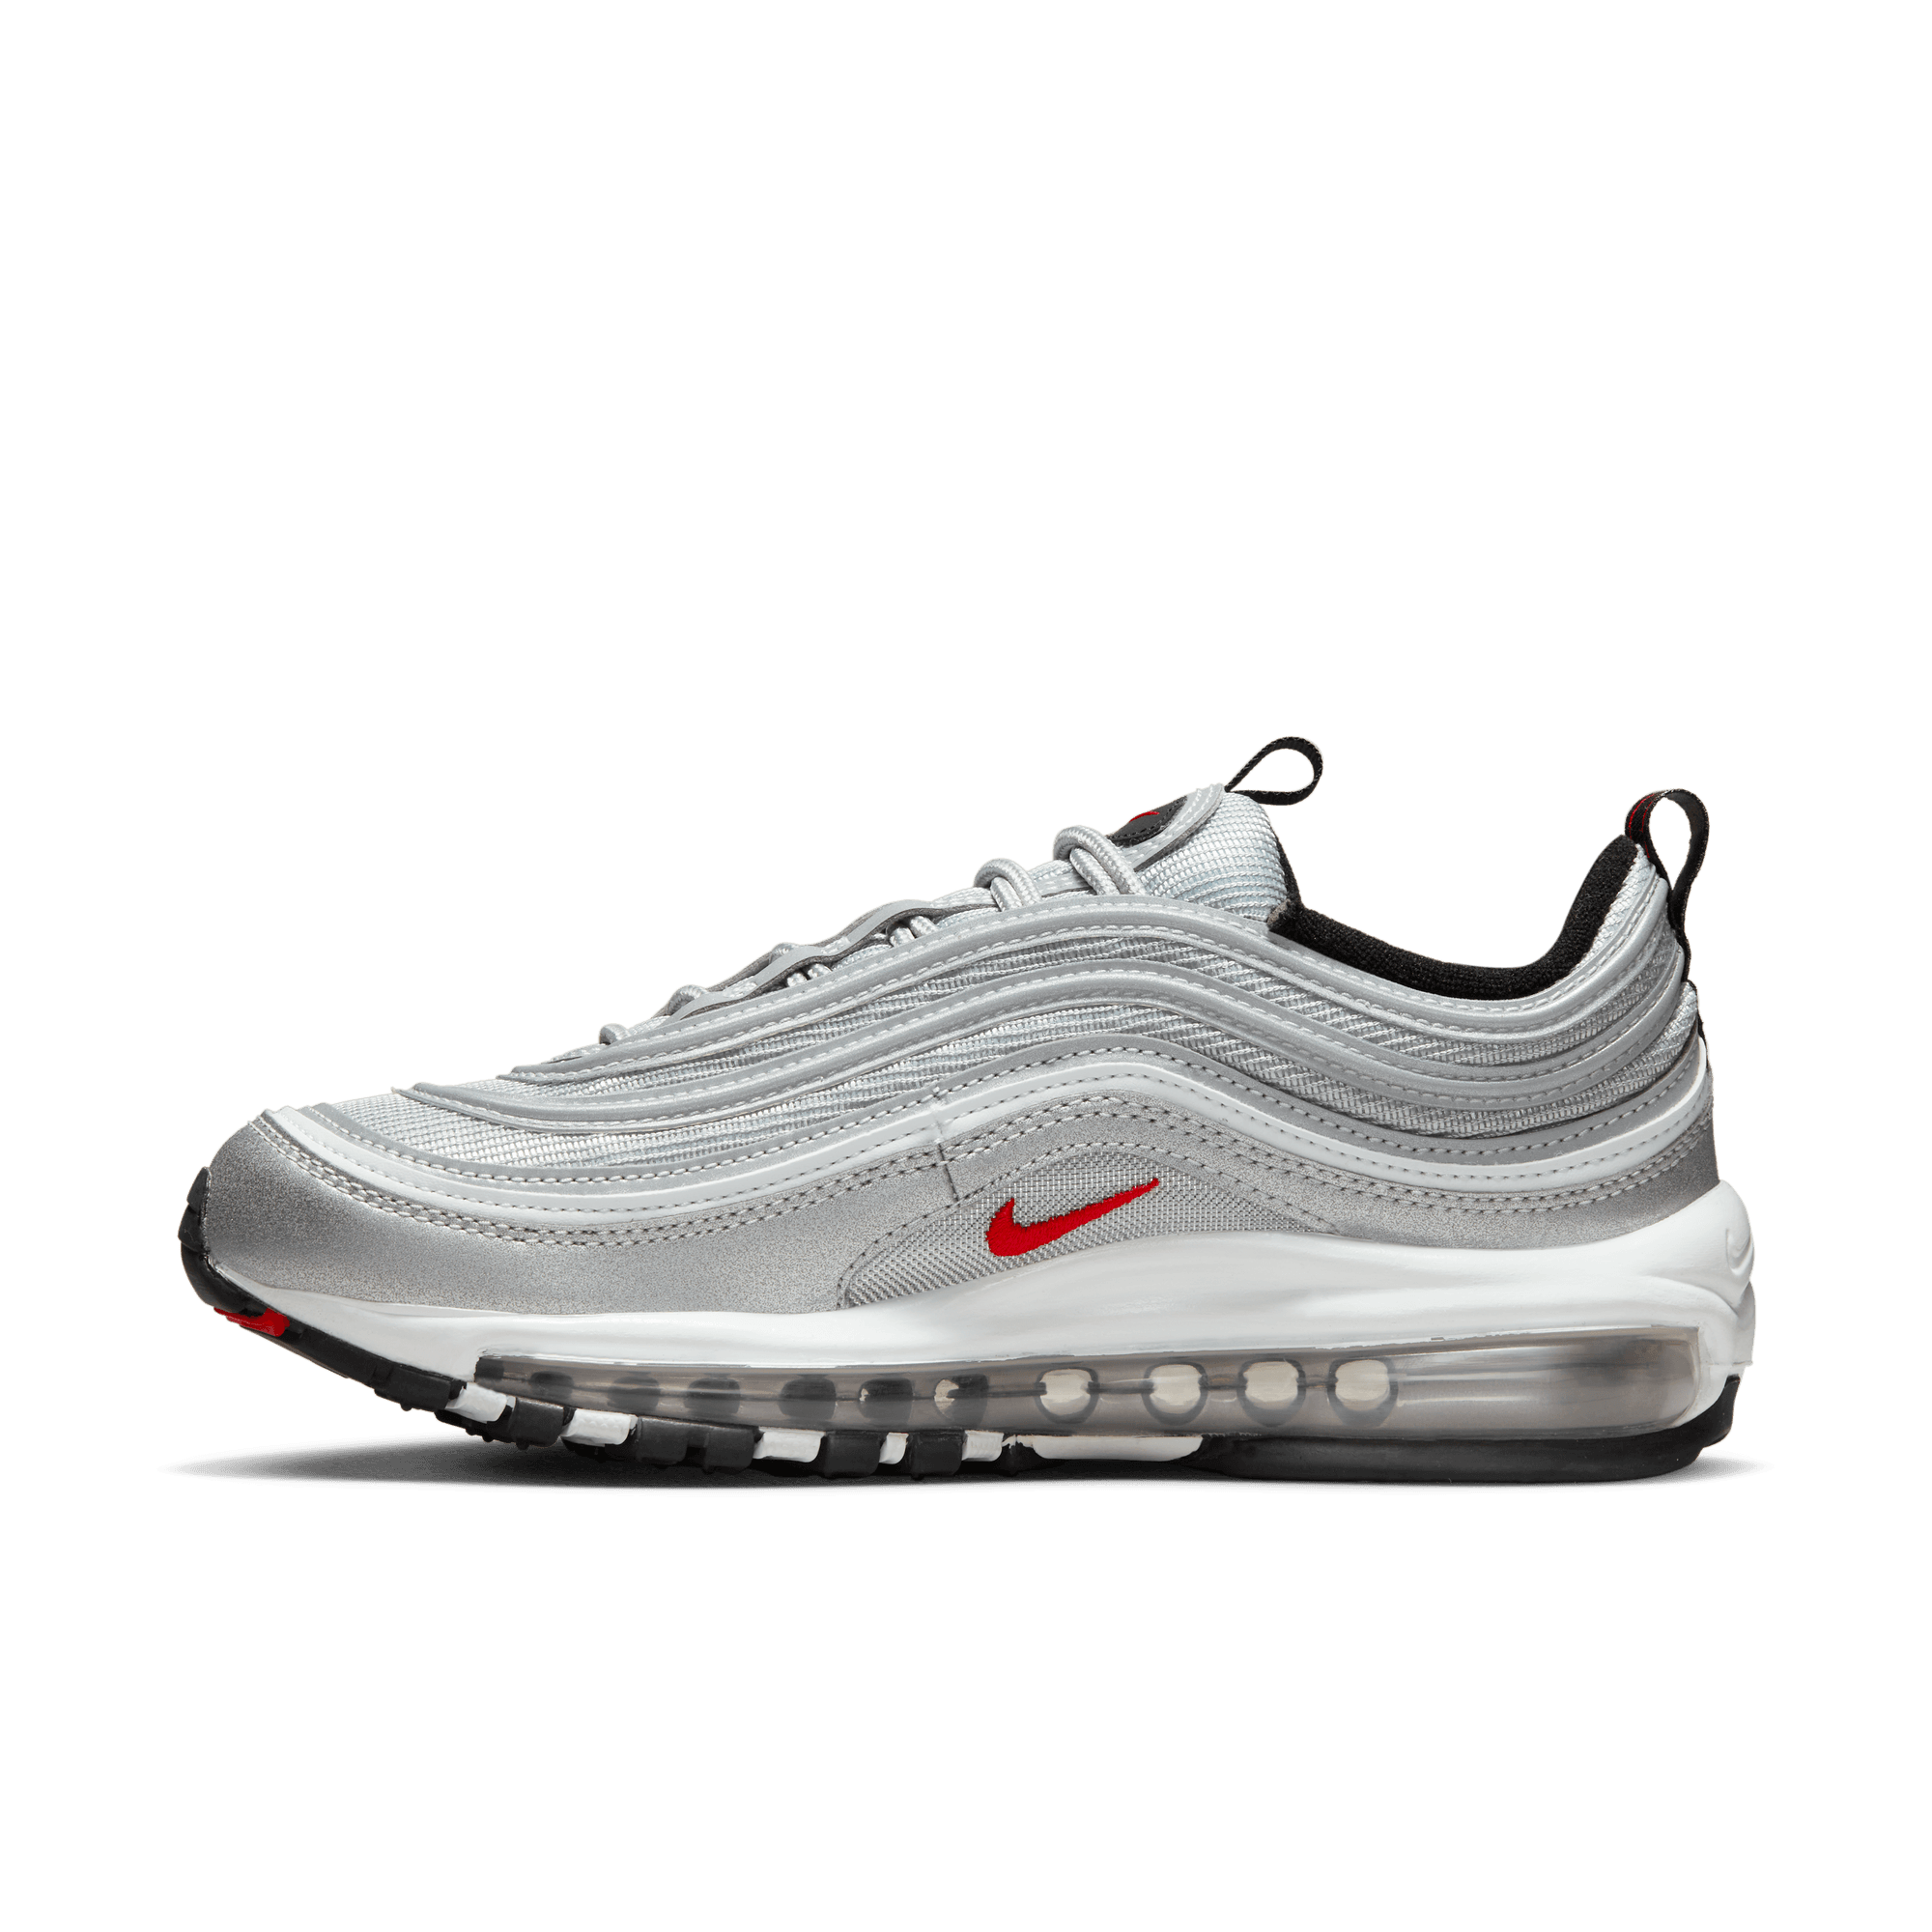 WMNS NIKE MAX 97 - 99 Problems